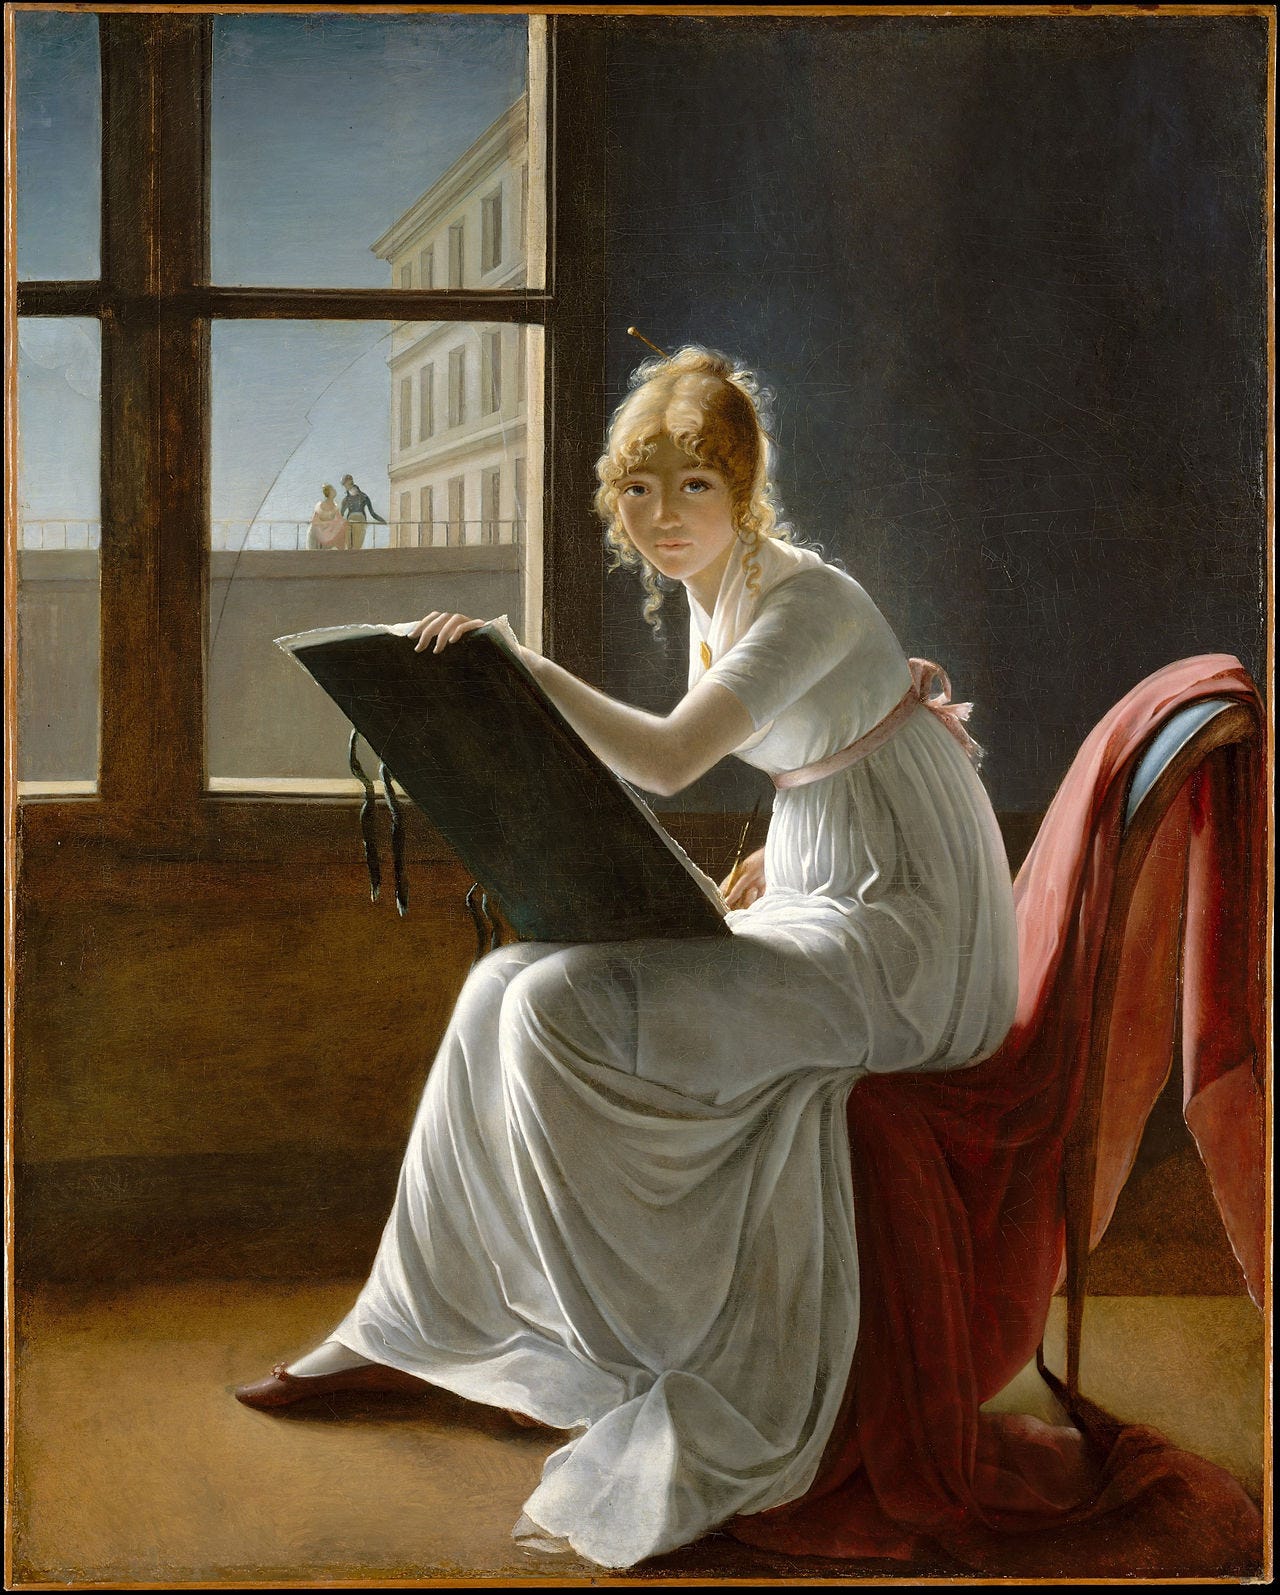 An oil painting of a young woman dressed in a flowing, white dress sitting on a chair with a red drape. An easel rests on her knees and she is evidently drawing. She is gazing directly at the observer.